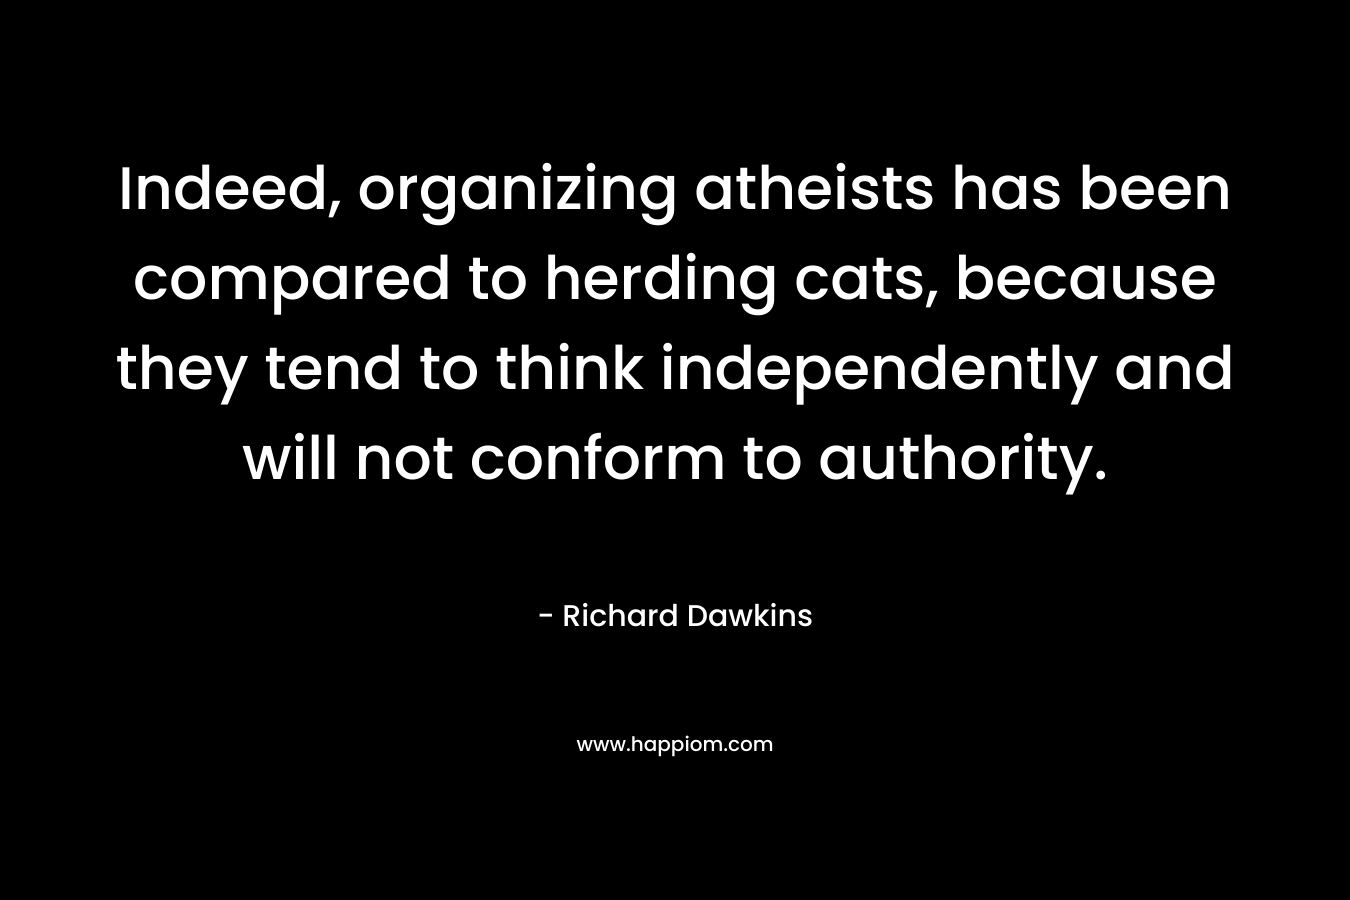 Indeed, organizing atheists has been compared to herding cats, because they tend to think independently and will not conform to authority.